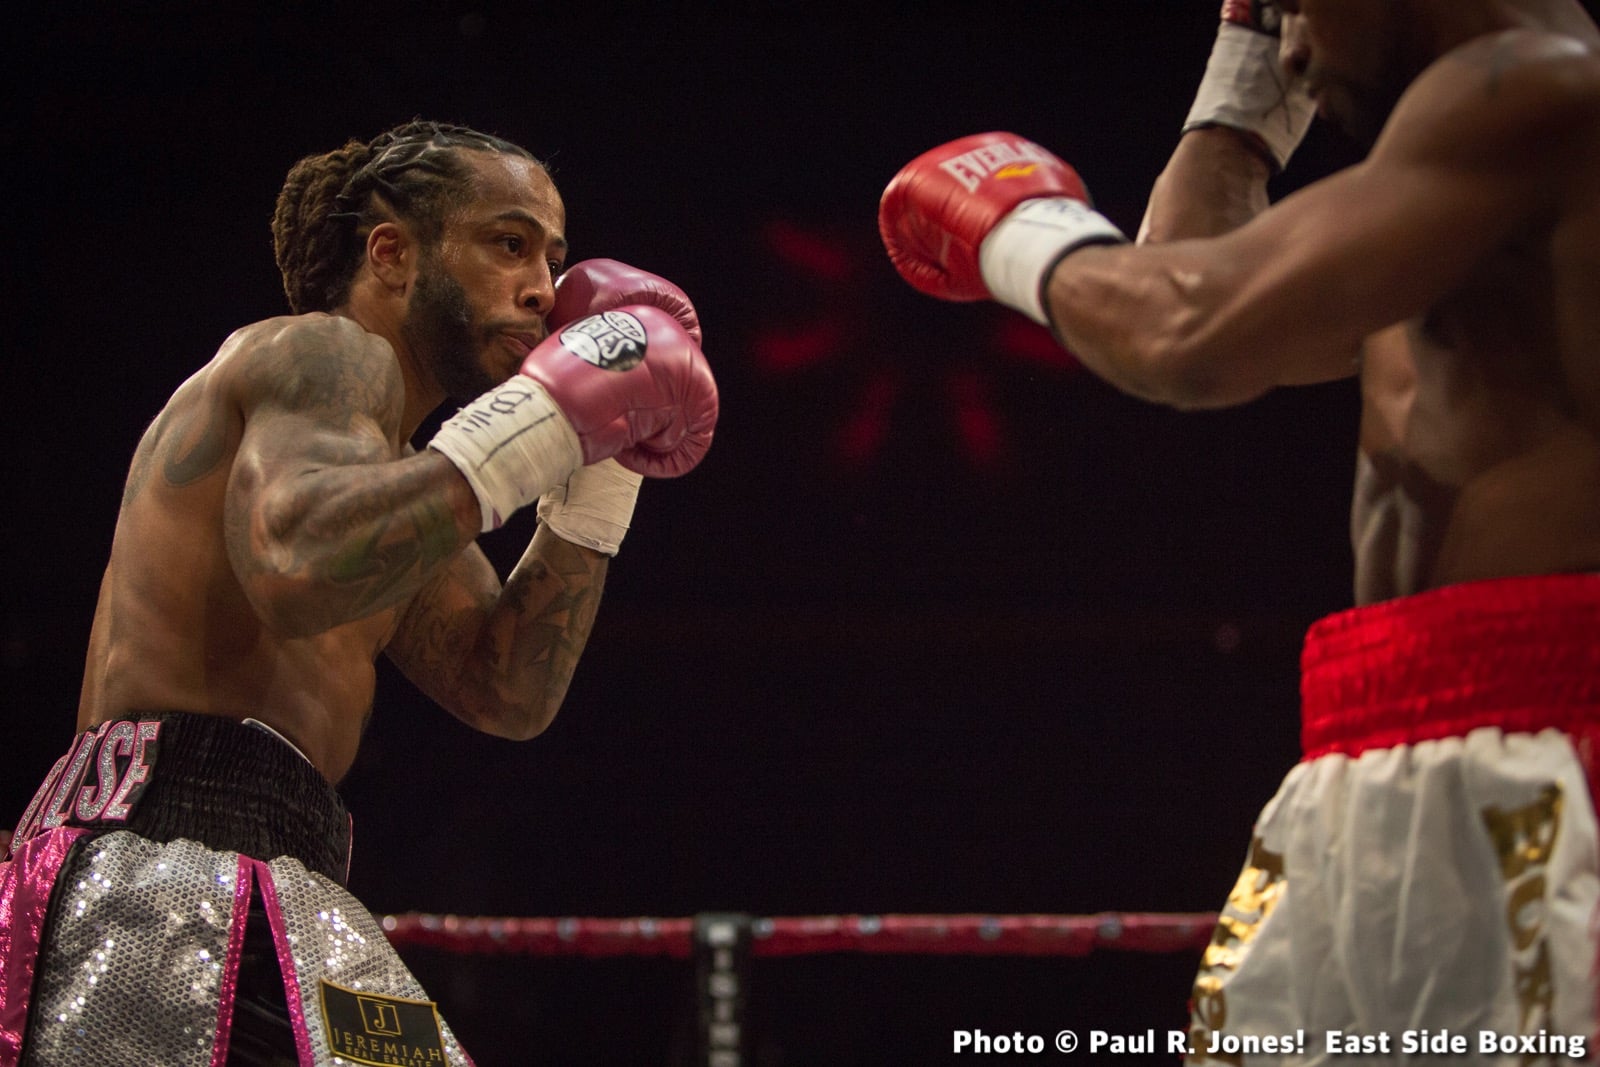 WEEKEND RECAP: With Hernández-Harrison a late scratch, Outlaw fills in and scores impressive KO win over Buelvas – Prograis, Hooker, Photos, More!